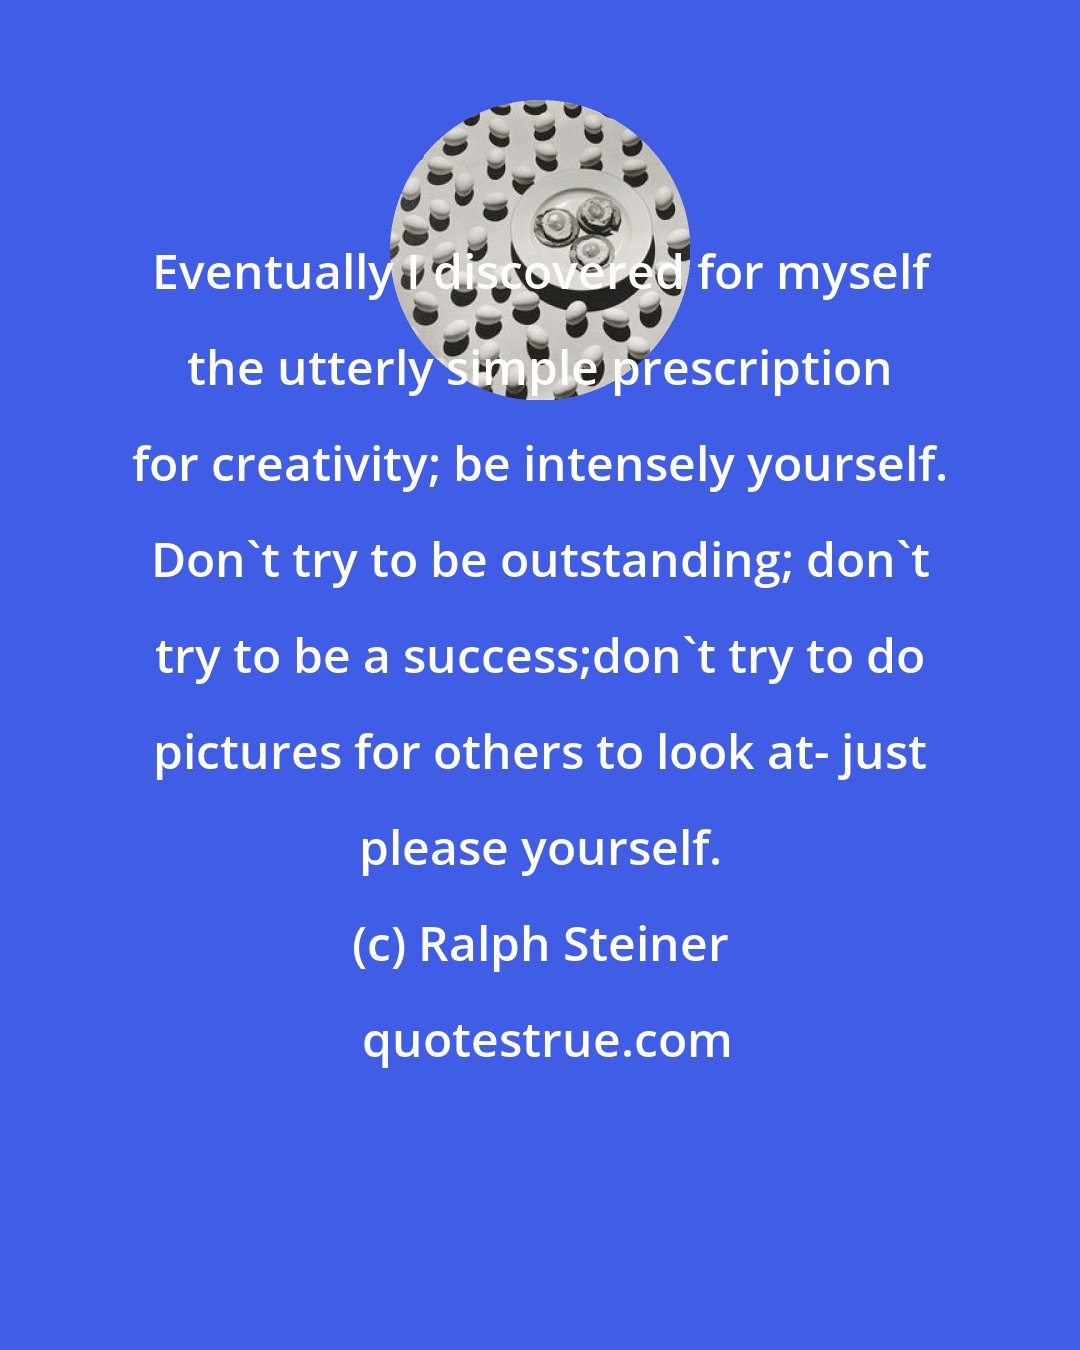 Ralph Steiner: Eventually I discovered for myself the utterly simple prescription for creativity; be intensely yourself. Don't try to be outstanding; don't try to be a success;don't try to do pictures for others to look at- just please yourself.